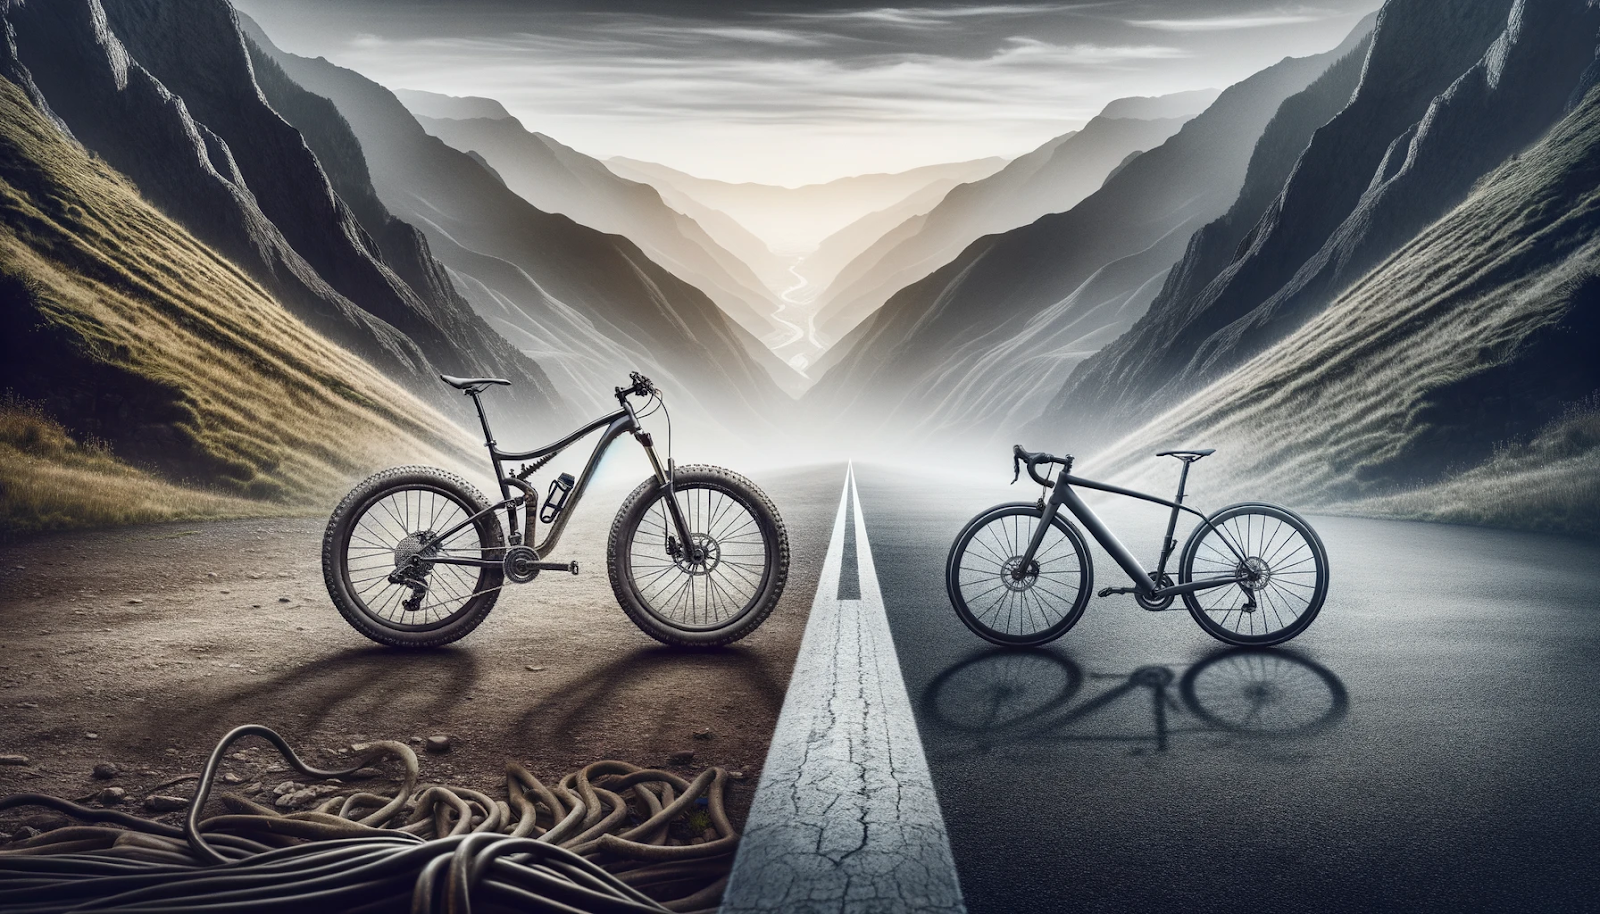 Photo of a mountain bike and a road bike placed side by side against a background that transitions from a rugged mountain trail to a smooth city road. The mountain bike is on the left, with its sturdy construction and knobby tires, placed on the rough trail side. The road bike is on the right, with its sleek design and thin tires, standing on the smooth road surface. A dividing line in the center emphasizes the stark contrast between the two bike types, clearly showcasing 'Mountain Bikes vs. Road Bikes'.